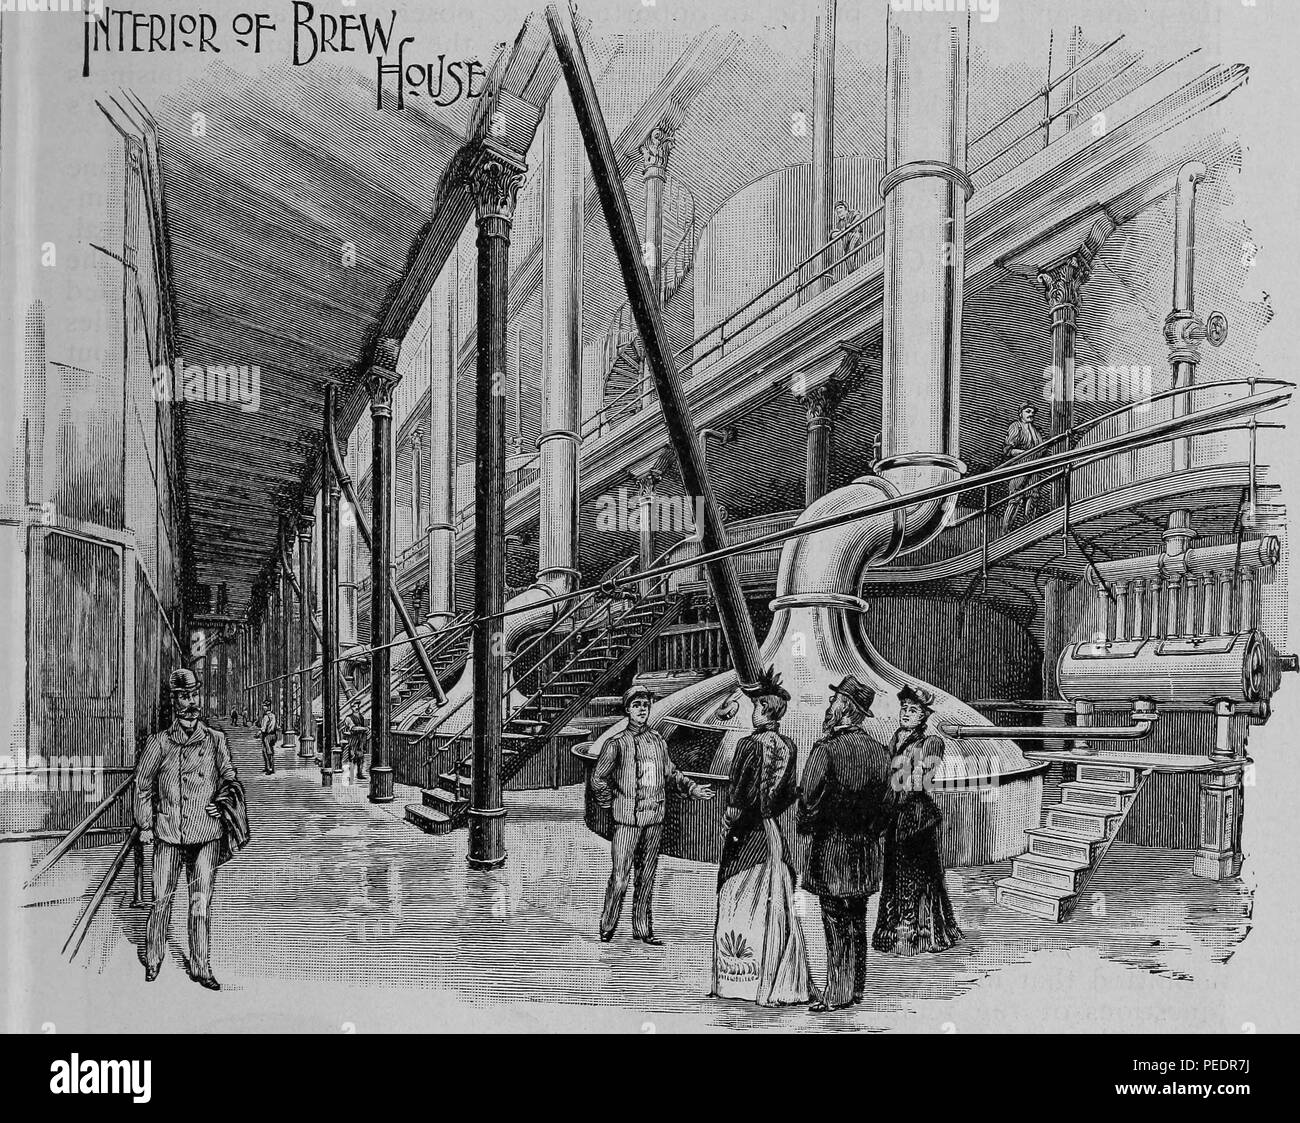 Black and white print illustrating the interior of the Pabst Brewing Company's Brewhouse, located in Milwaukee, Wisconson, USA, published in 'The Official Directory of the World's Columbian Exposition' as part of the Brewery's advertising efforts during the World's Columbian Exposition aka the Chicago World's Fair, 1893. Courtesy Internet Archive. () Stock Photo